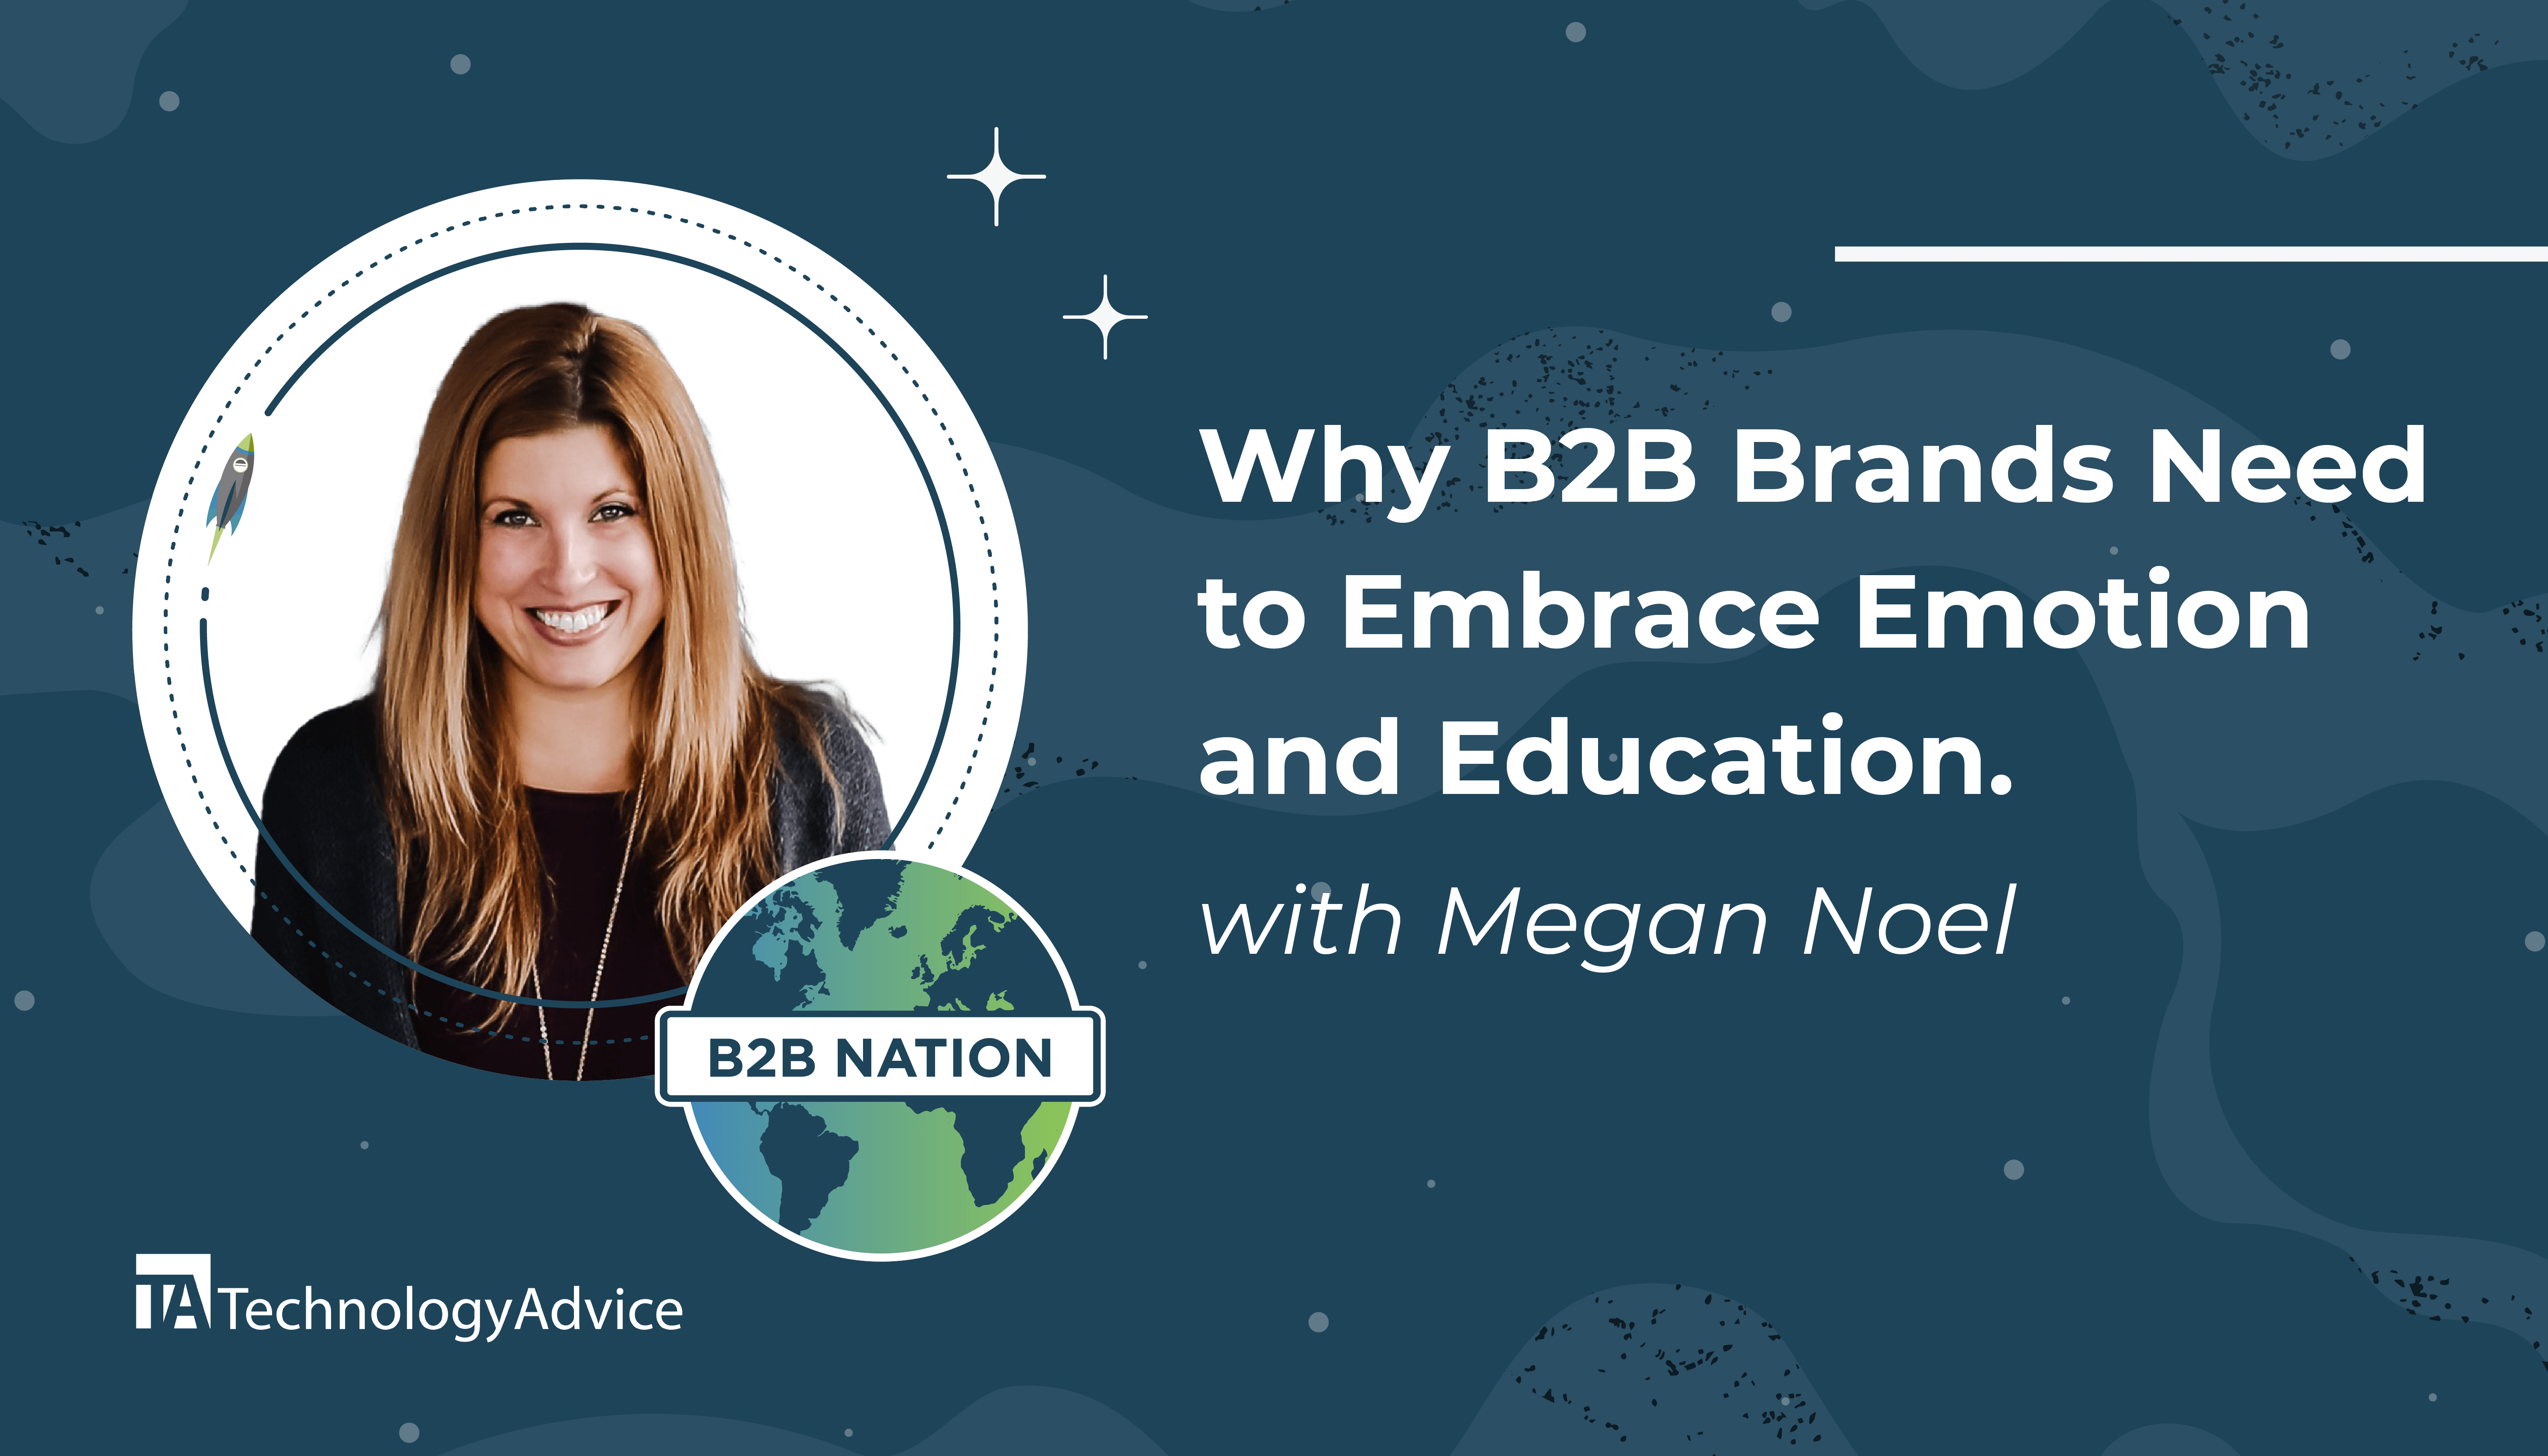 Megan Noel discusses the need for education and emotion in B2B marketing.